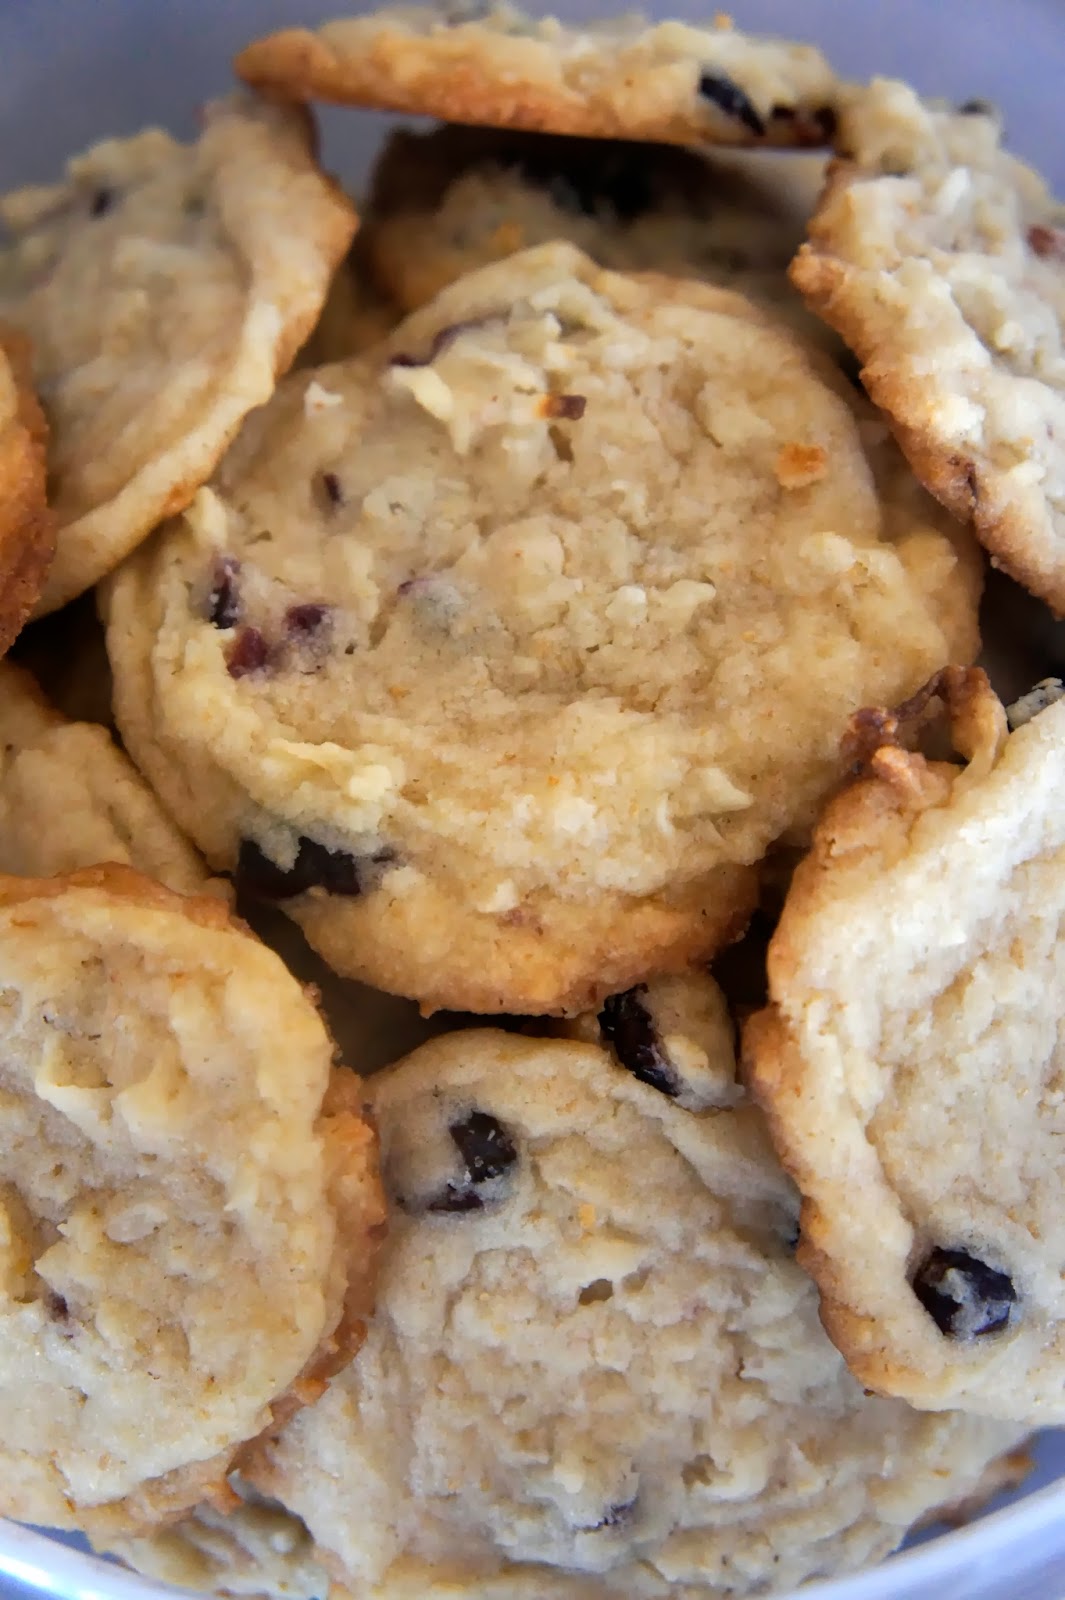 Savory Sweet and Satisfying: Coconut Cranberry Cookies